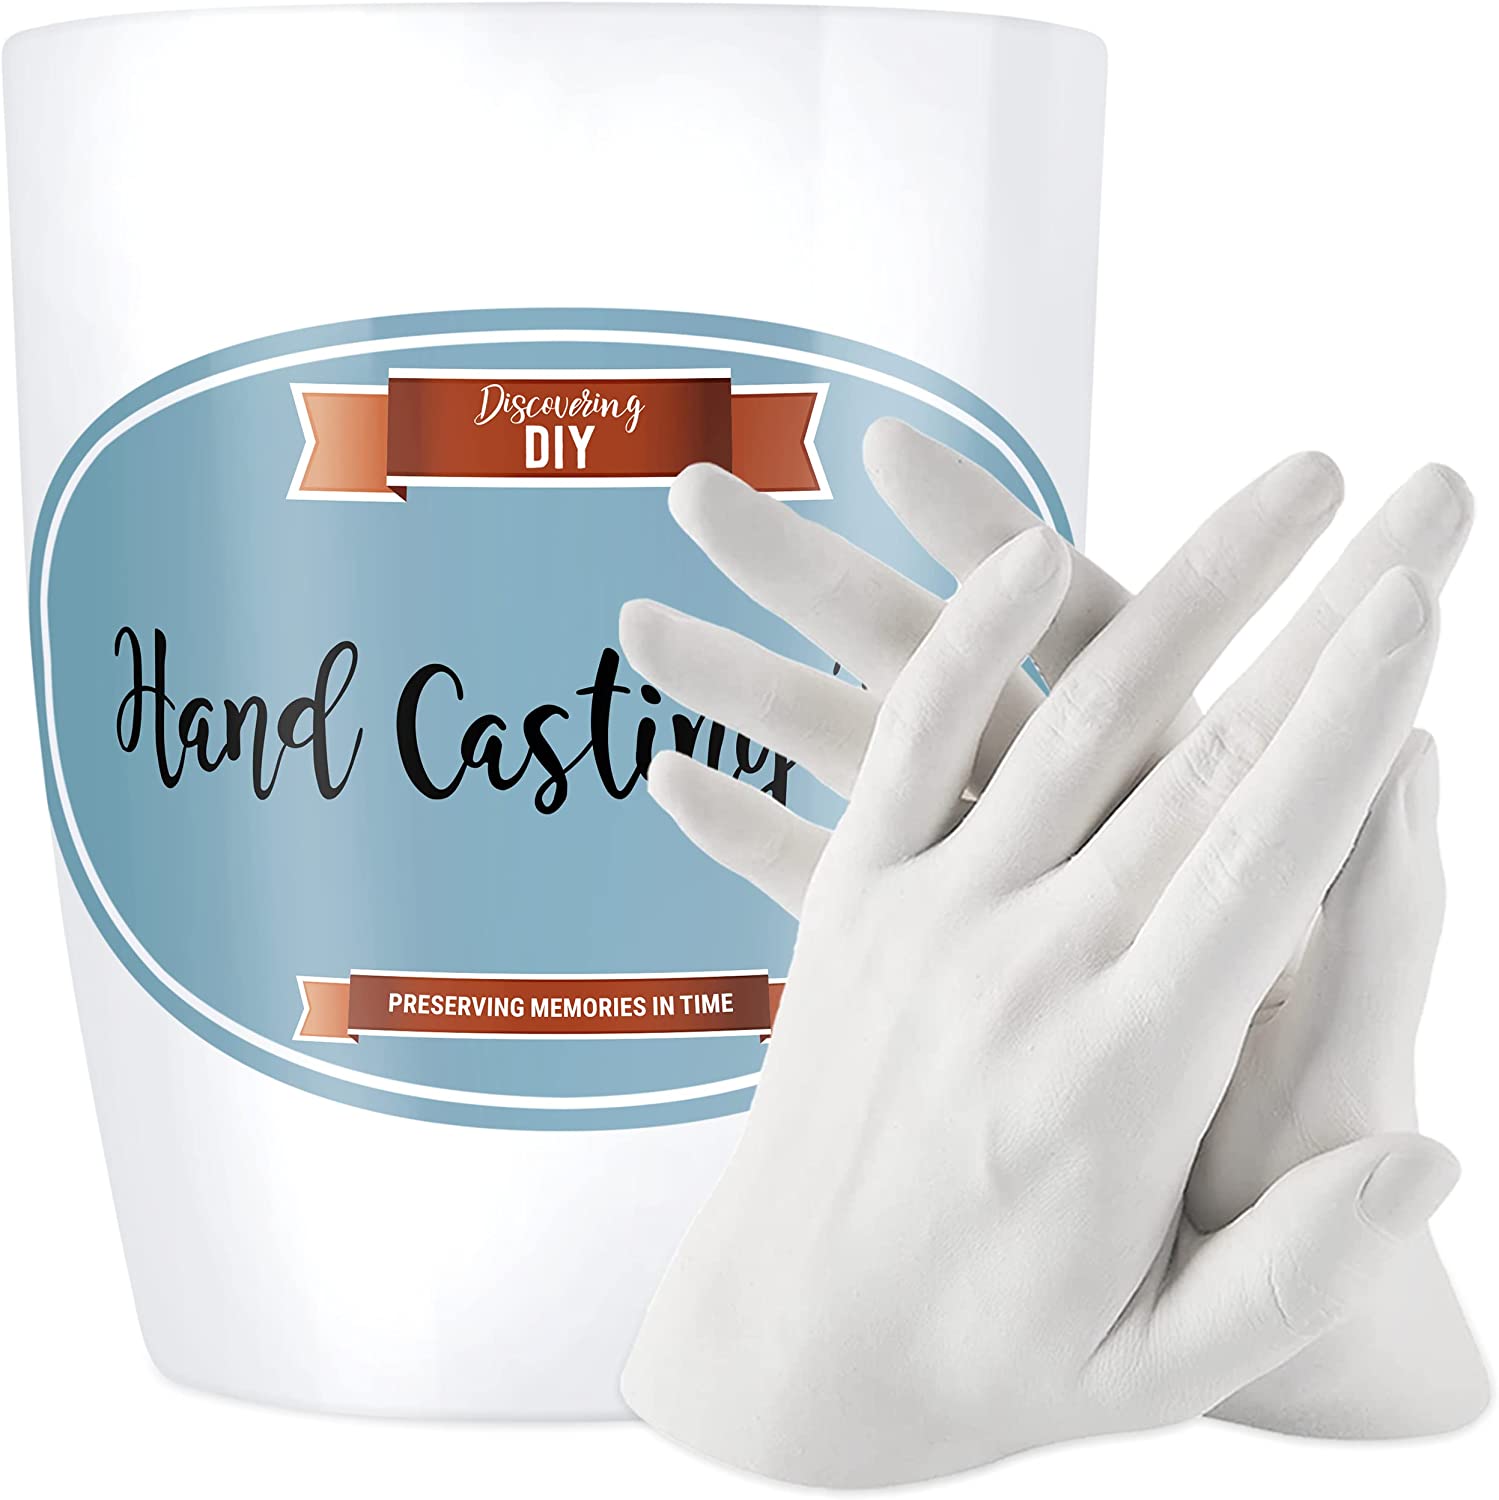 Hand Casting Kit Couples - His and Hers Gifts, DIY Kit, Plaster